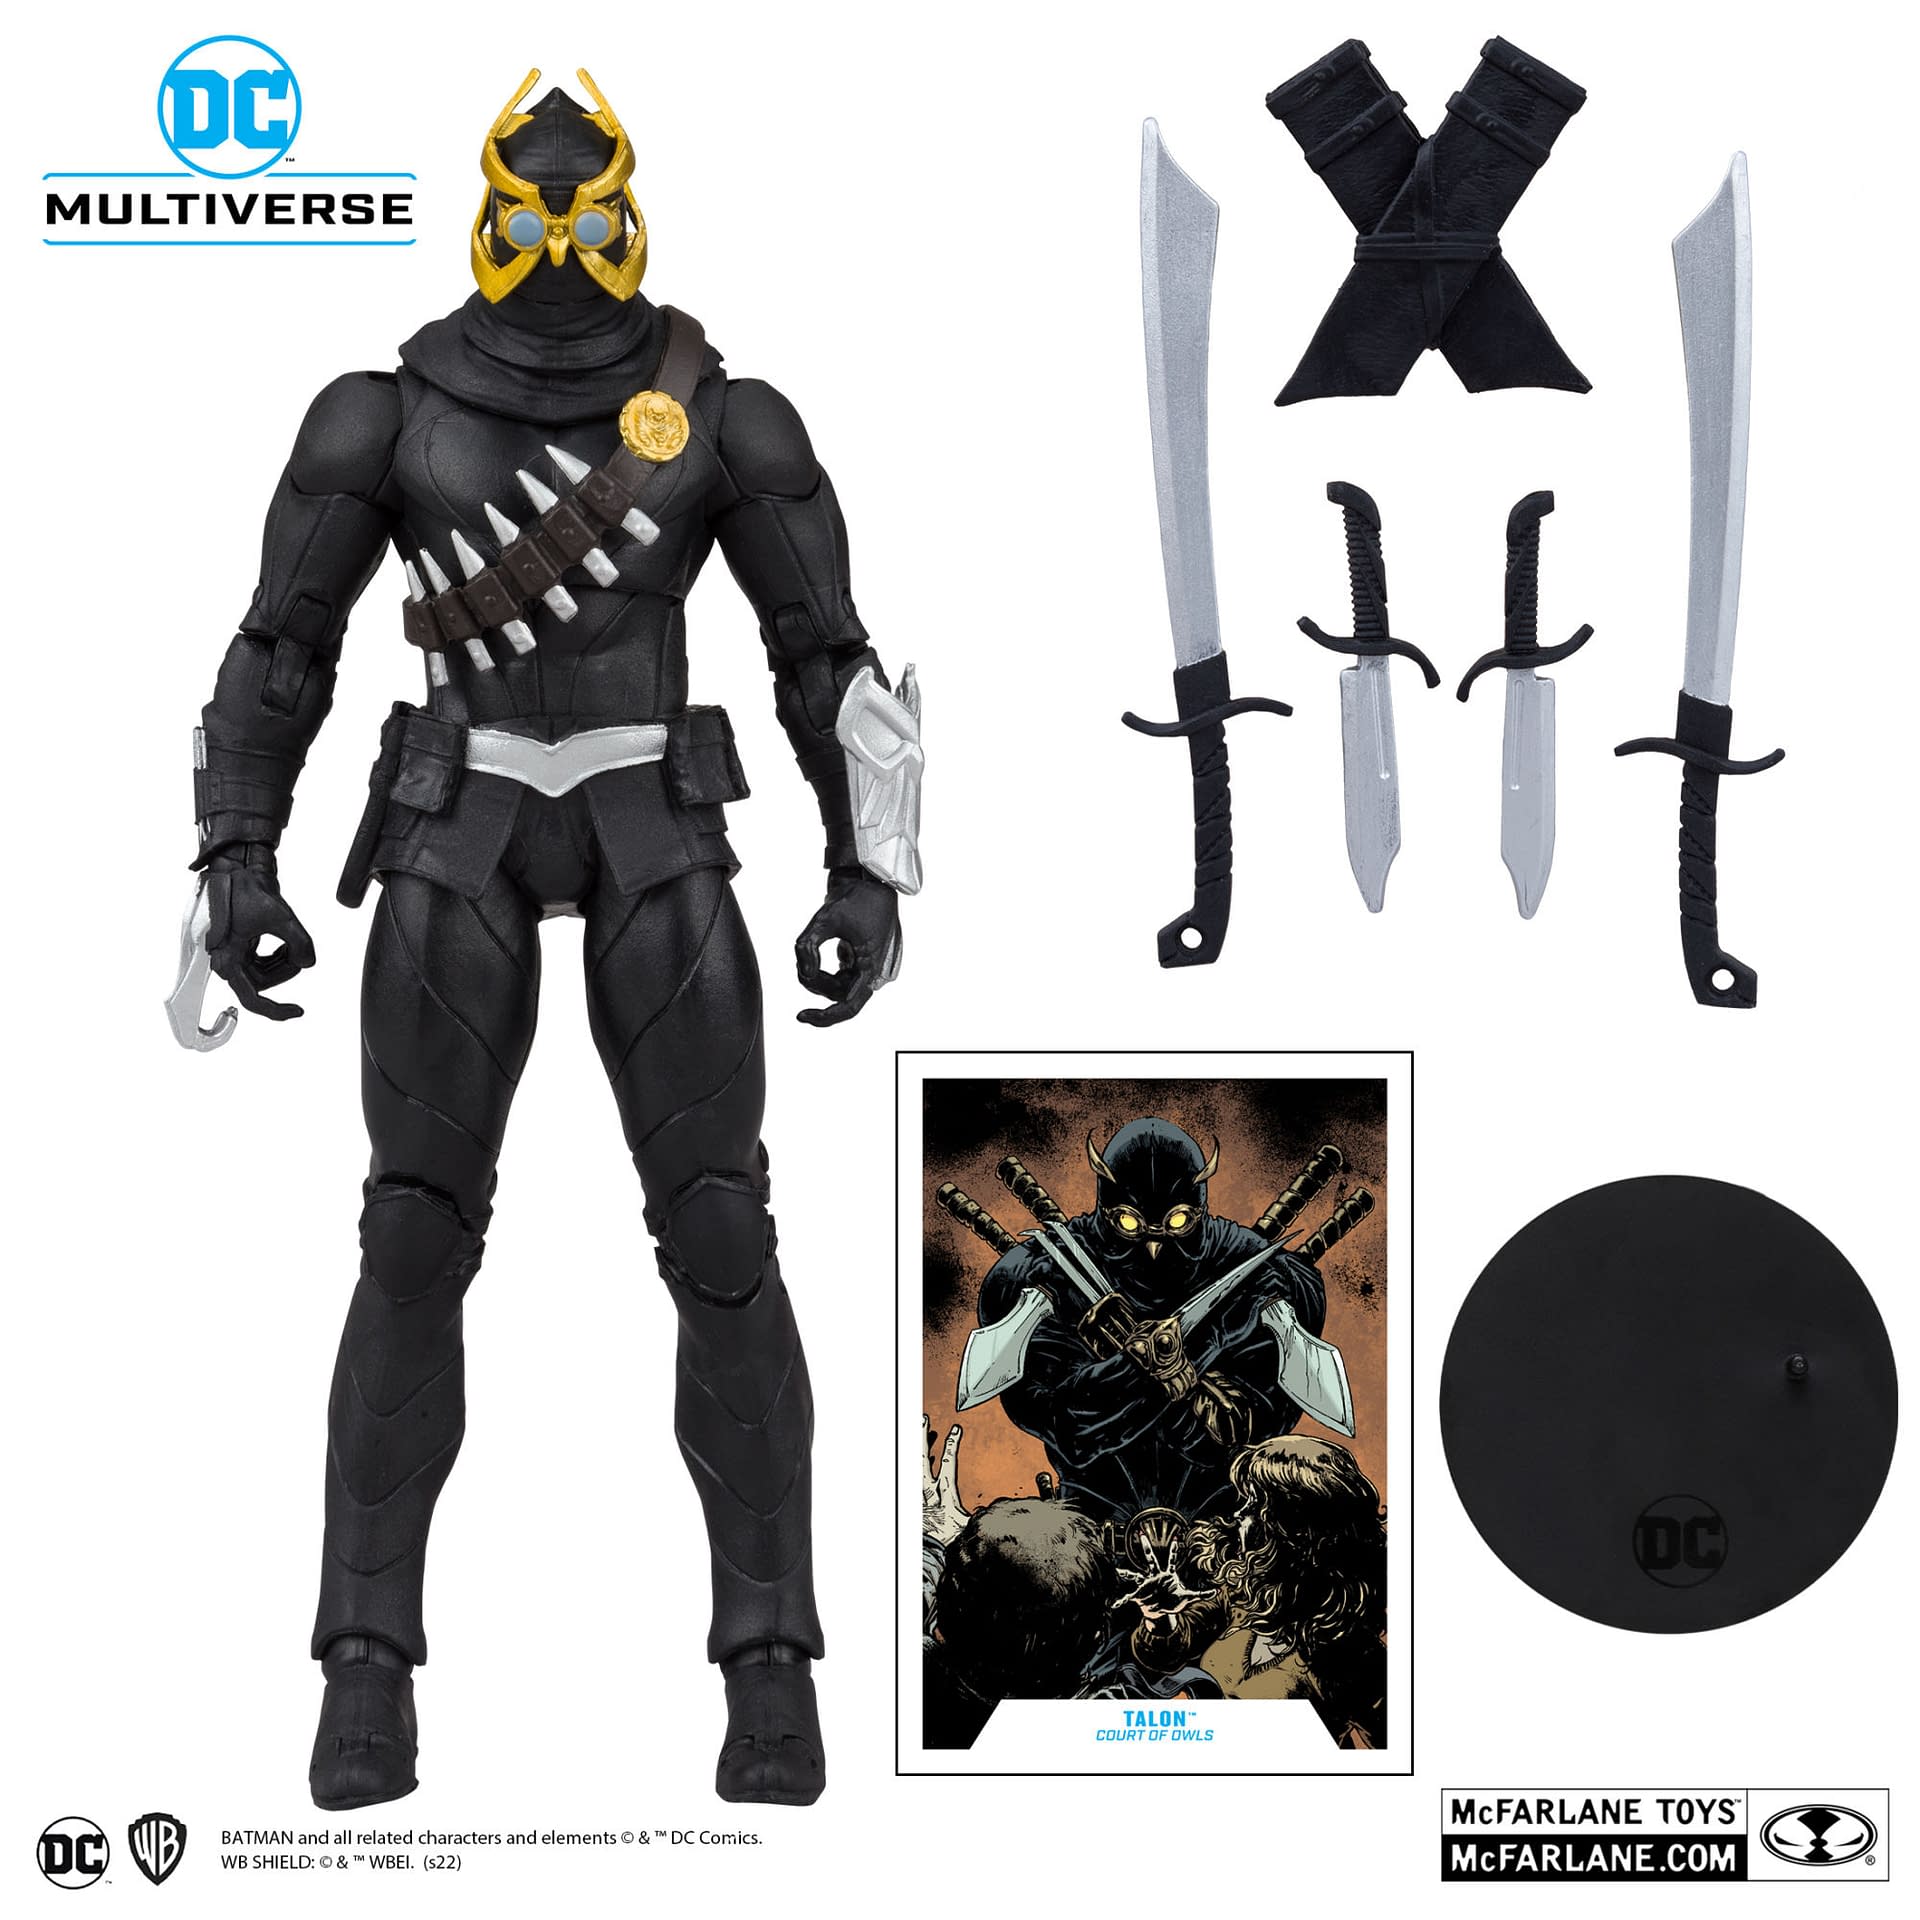 The Court of Owls Comes to McFarlane with New DC Comics Talon Figure